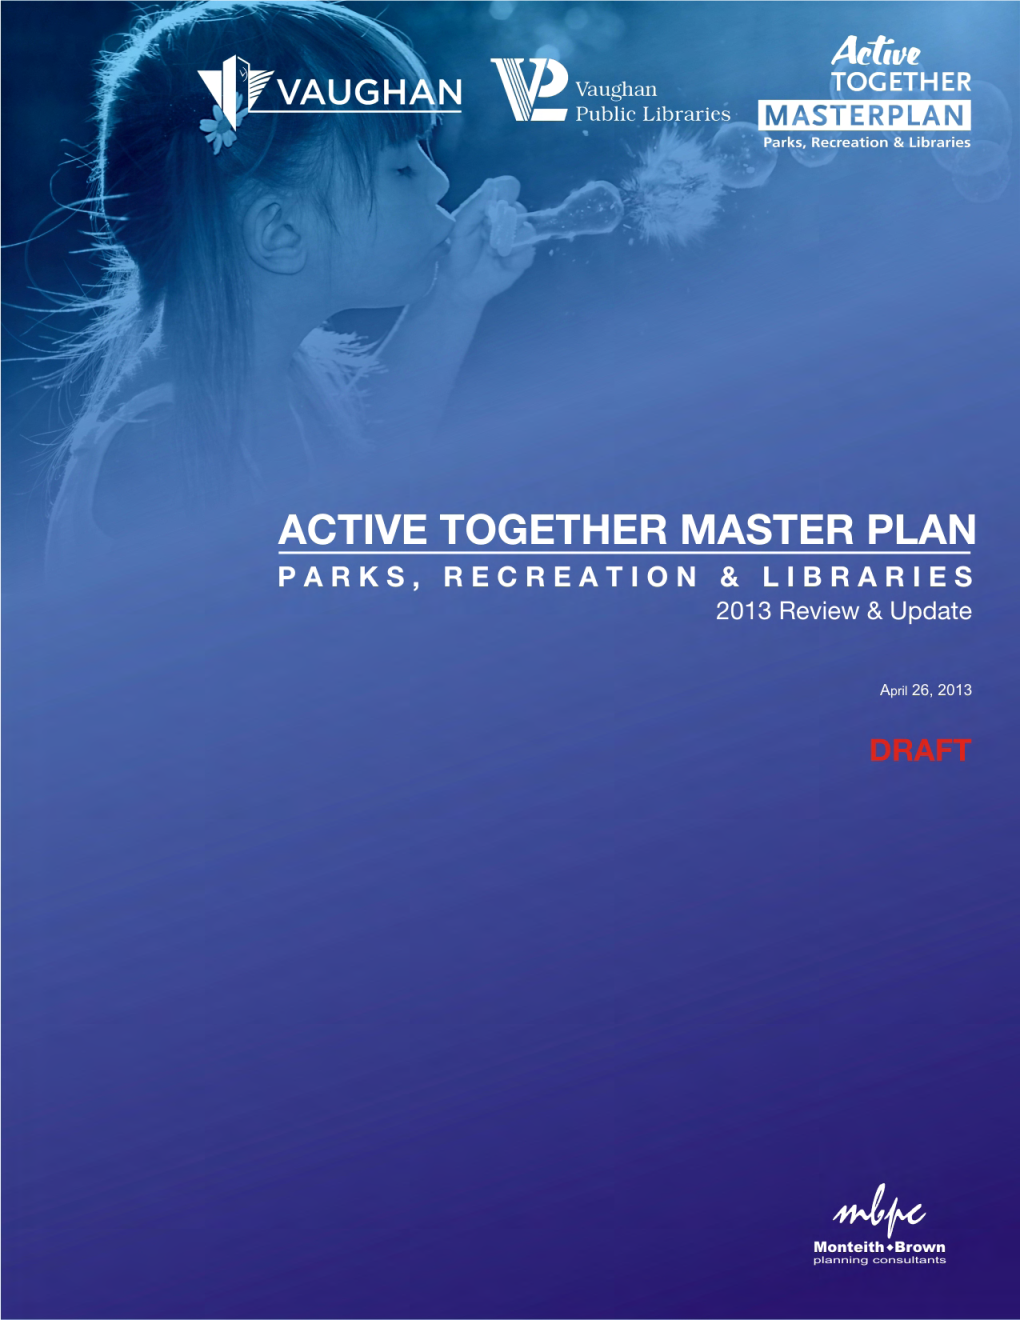 ACTIVE TOGETHER MASTER PLAN for Parks, Recreation & Libraries